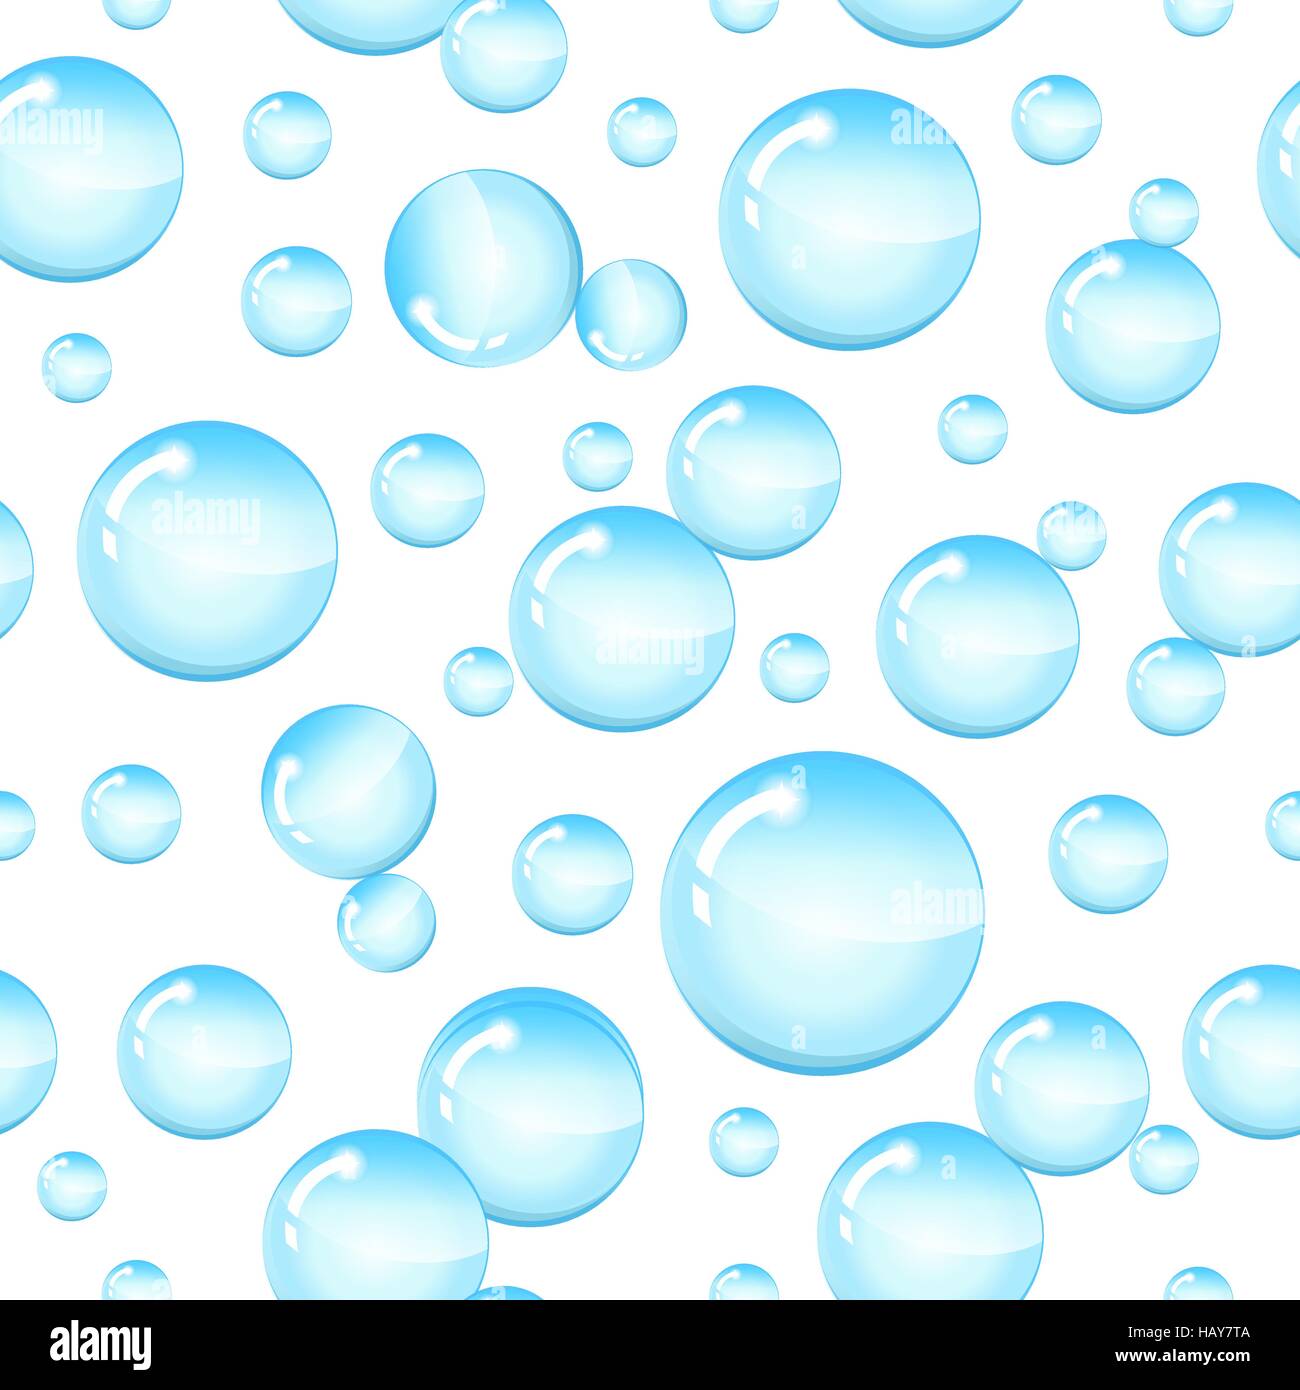 Seamless Glossy Bubble Textures